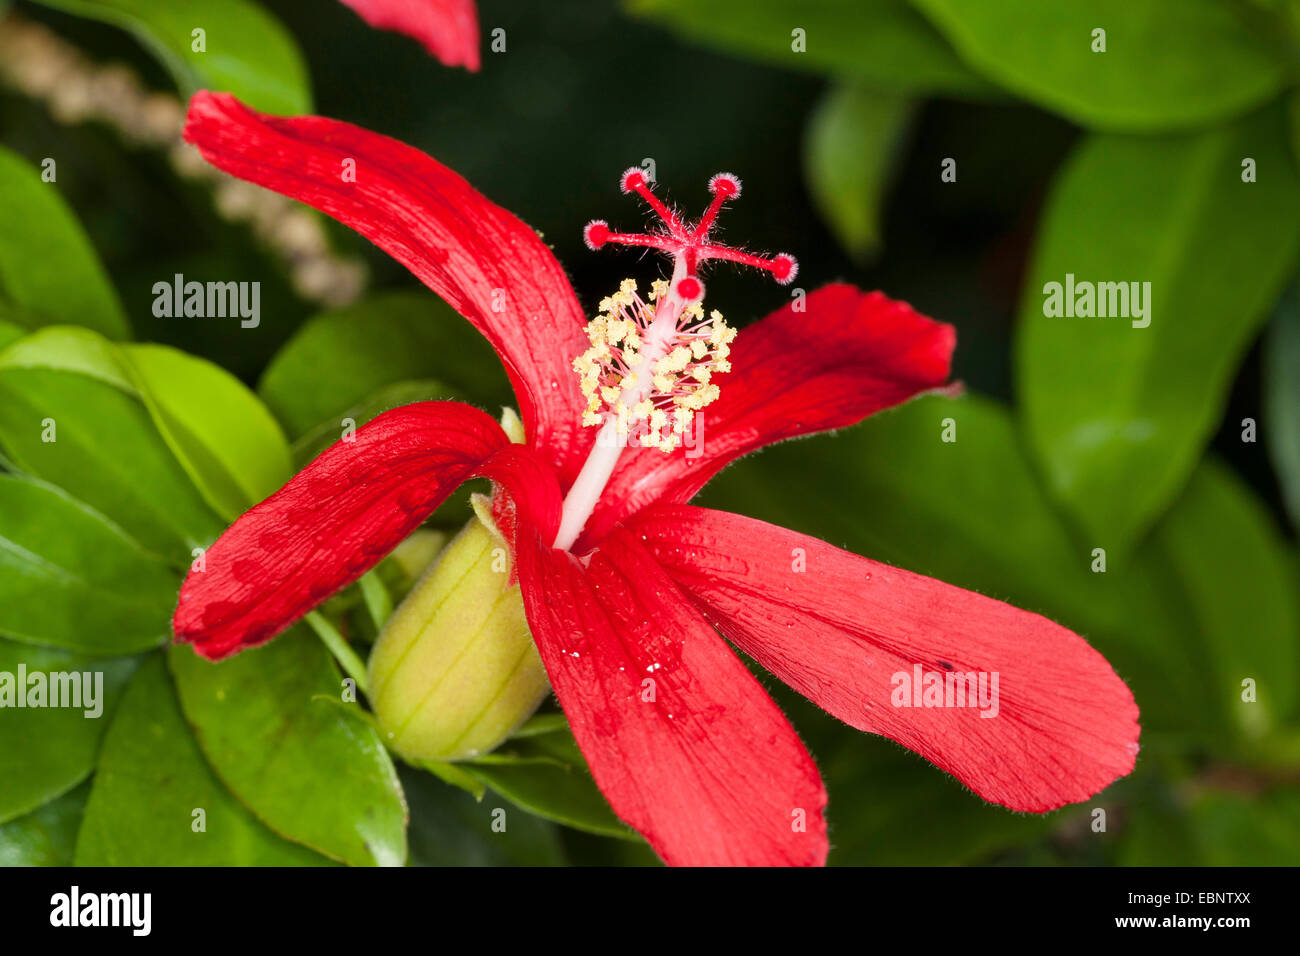 Hawaiian red hibiscus, Hawaiian hibiscus, hibiscus, Giant mallow, Rose Mallow (Hibiscus clayi), endemic on Hawaii Stock Photo